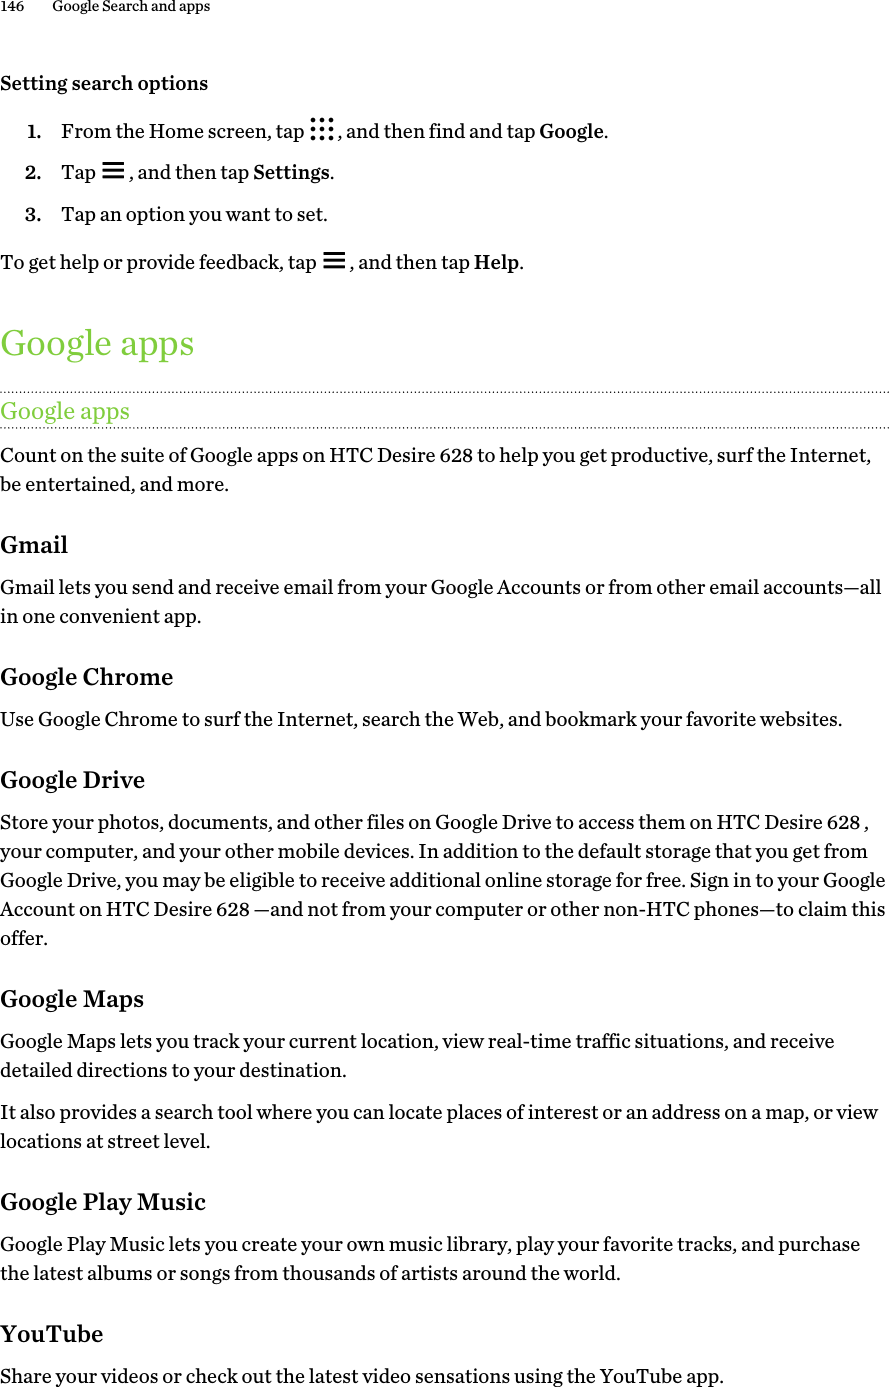 Setting search options1. From the Home screen, tap  , and then find and tap Google.2. Tap  , and then tap Settings.3. Tap an option you want to set.To get help or provide feedback, tap  , and then tap Help.Google appsGoogle appsCount on the suite of Google apps on HTC Desire 628 to help you get productive, surf the Internet,be entertained, and more.GmailGmail lets you send and receive email from your Google Accounts or from other email accounts—allin one convenient app.Google ChromeUse Google Chrome to surf the Internet, search the Web, and bookmark your favorite websites.Google DriveStore your photos, documents, and other files on Google Drive to access them on HTC Desire 628 ,your computer, and your other mobile devices. In addition to the default storage that you get fromGoogle Drive, you may be eligible to receive additional online storage for free. Sign in to your GoogleAccount on HTC Desire 628 —and not from your computer or other non-HTC phones—to claim thisoffer.Google MapsGoogle Maps lets you track your current location, view real-time traffic situations, and receivedetailed directions to your destination.It also provides a search tool where you can locate places of interest or an address on a map, or viewlocations at street level.Google Play MusicGoogle Play Music lets you create your own music library, play your favorite tracks, and purchasethe latest albums or songs from thousands of artists around the world.YouTubeShare your videos or check out the latest video sensations using the YouTube app.146 Google Search and apps